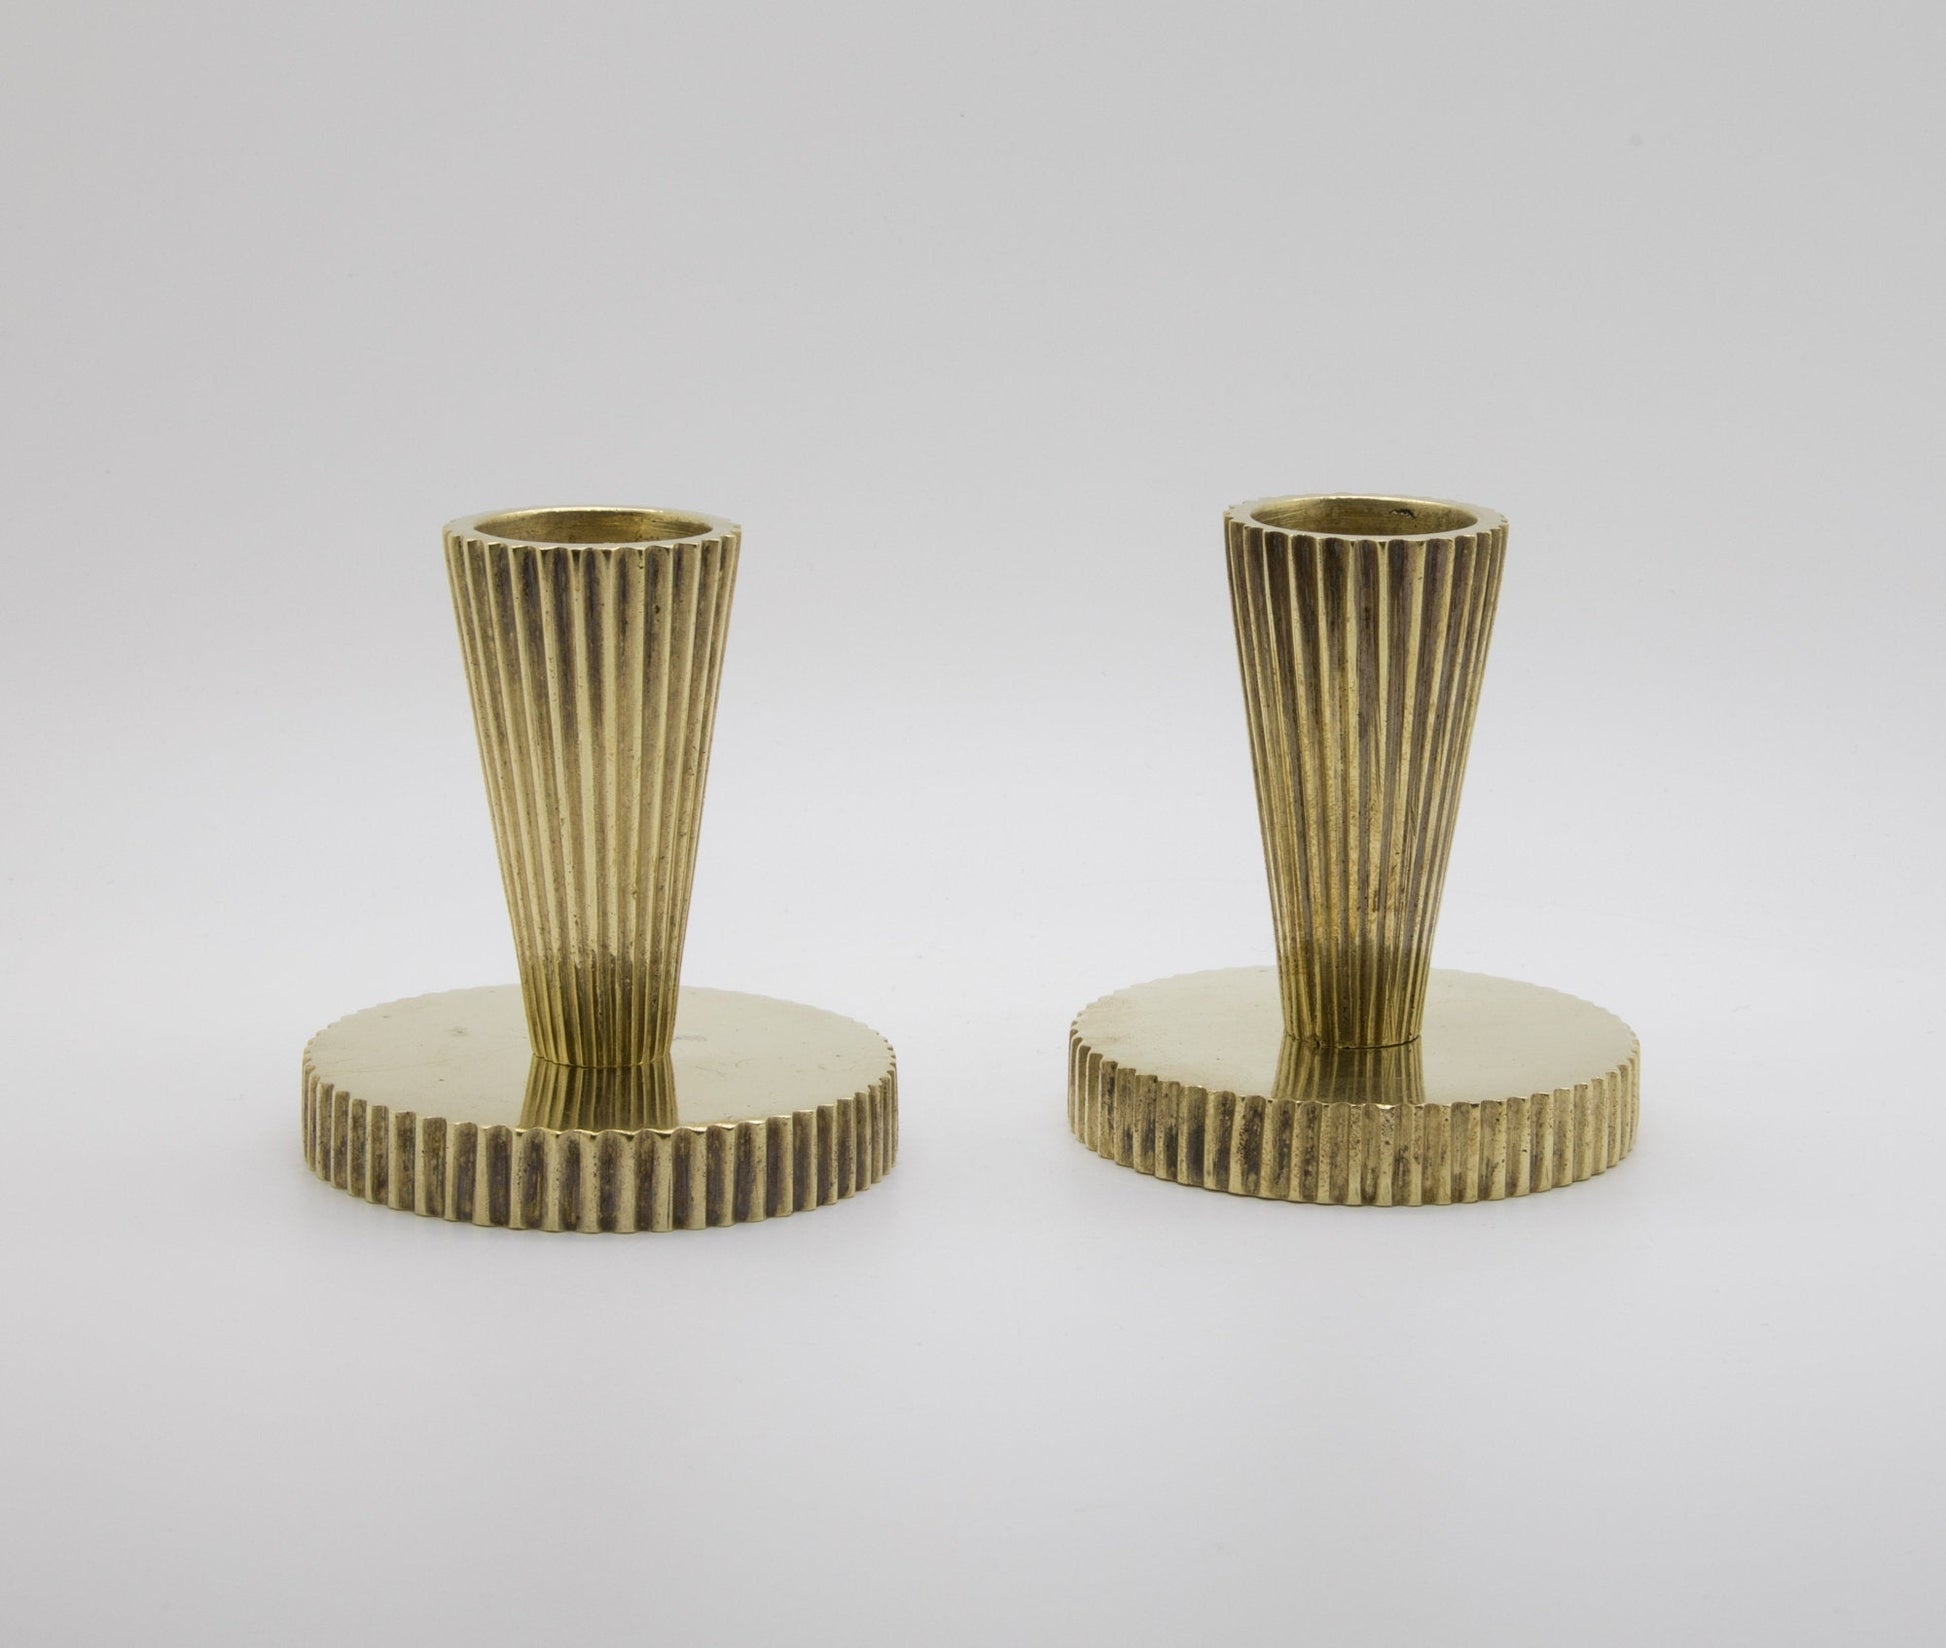 2 x Modernist TINOS Fluted Solid Bronze Candle Holders Mollaris.com 